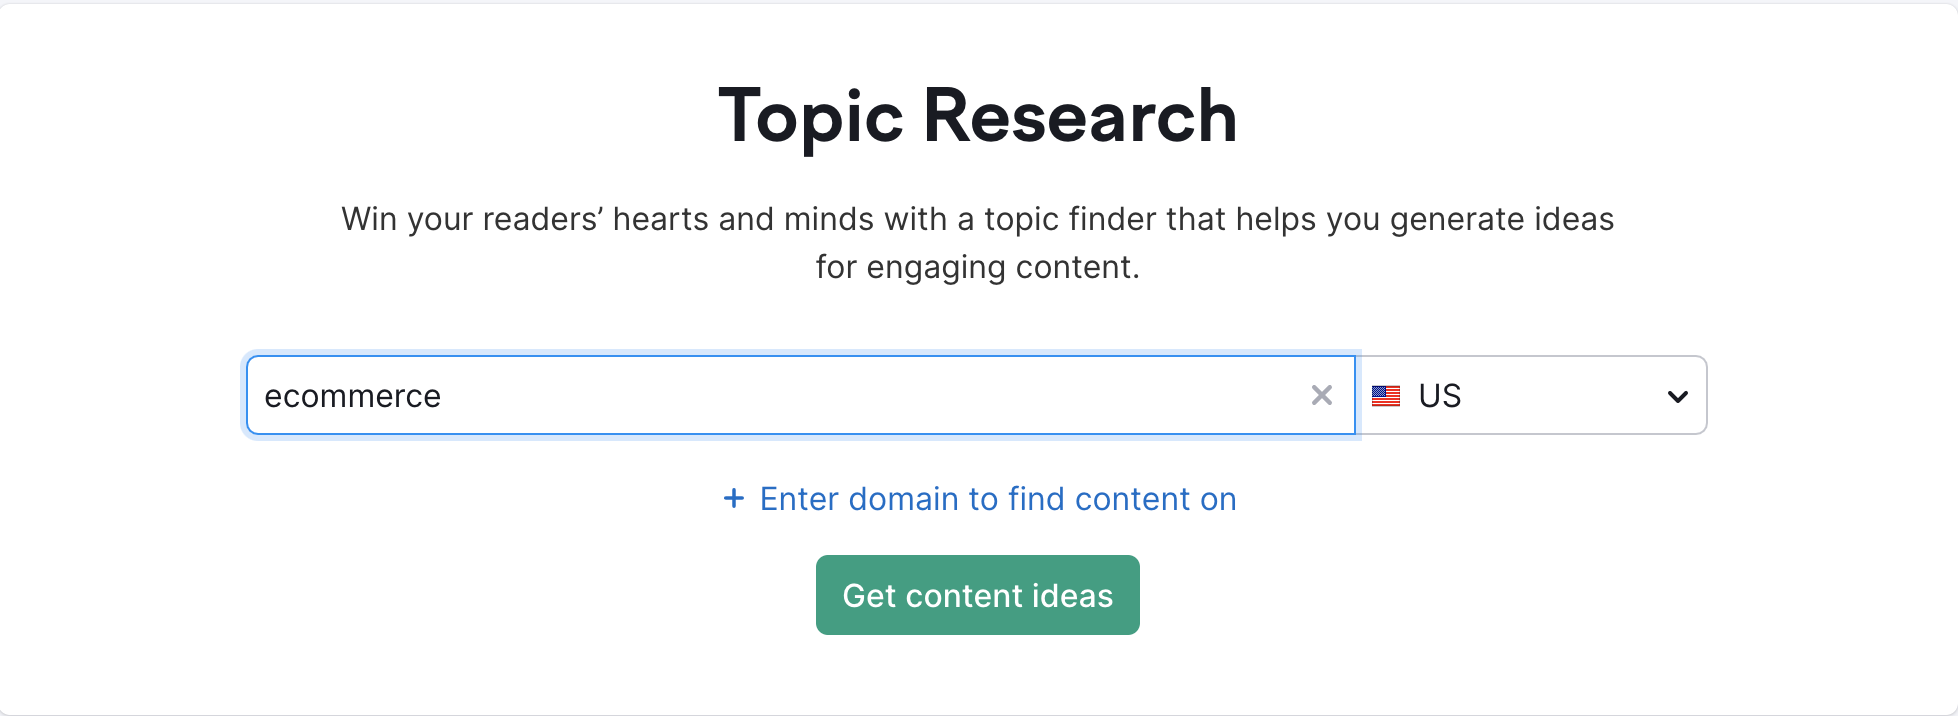 Topic Research for idea generation: screen one